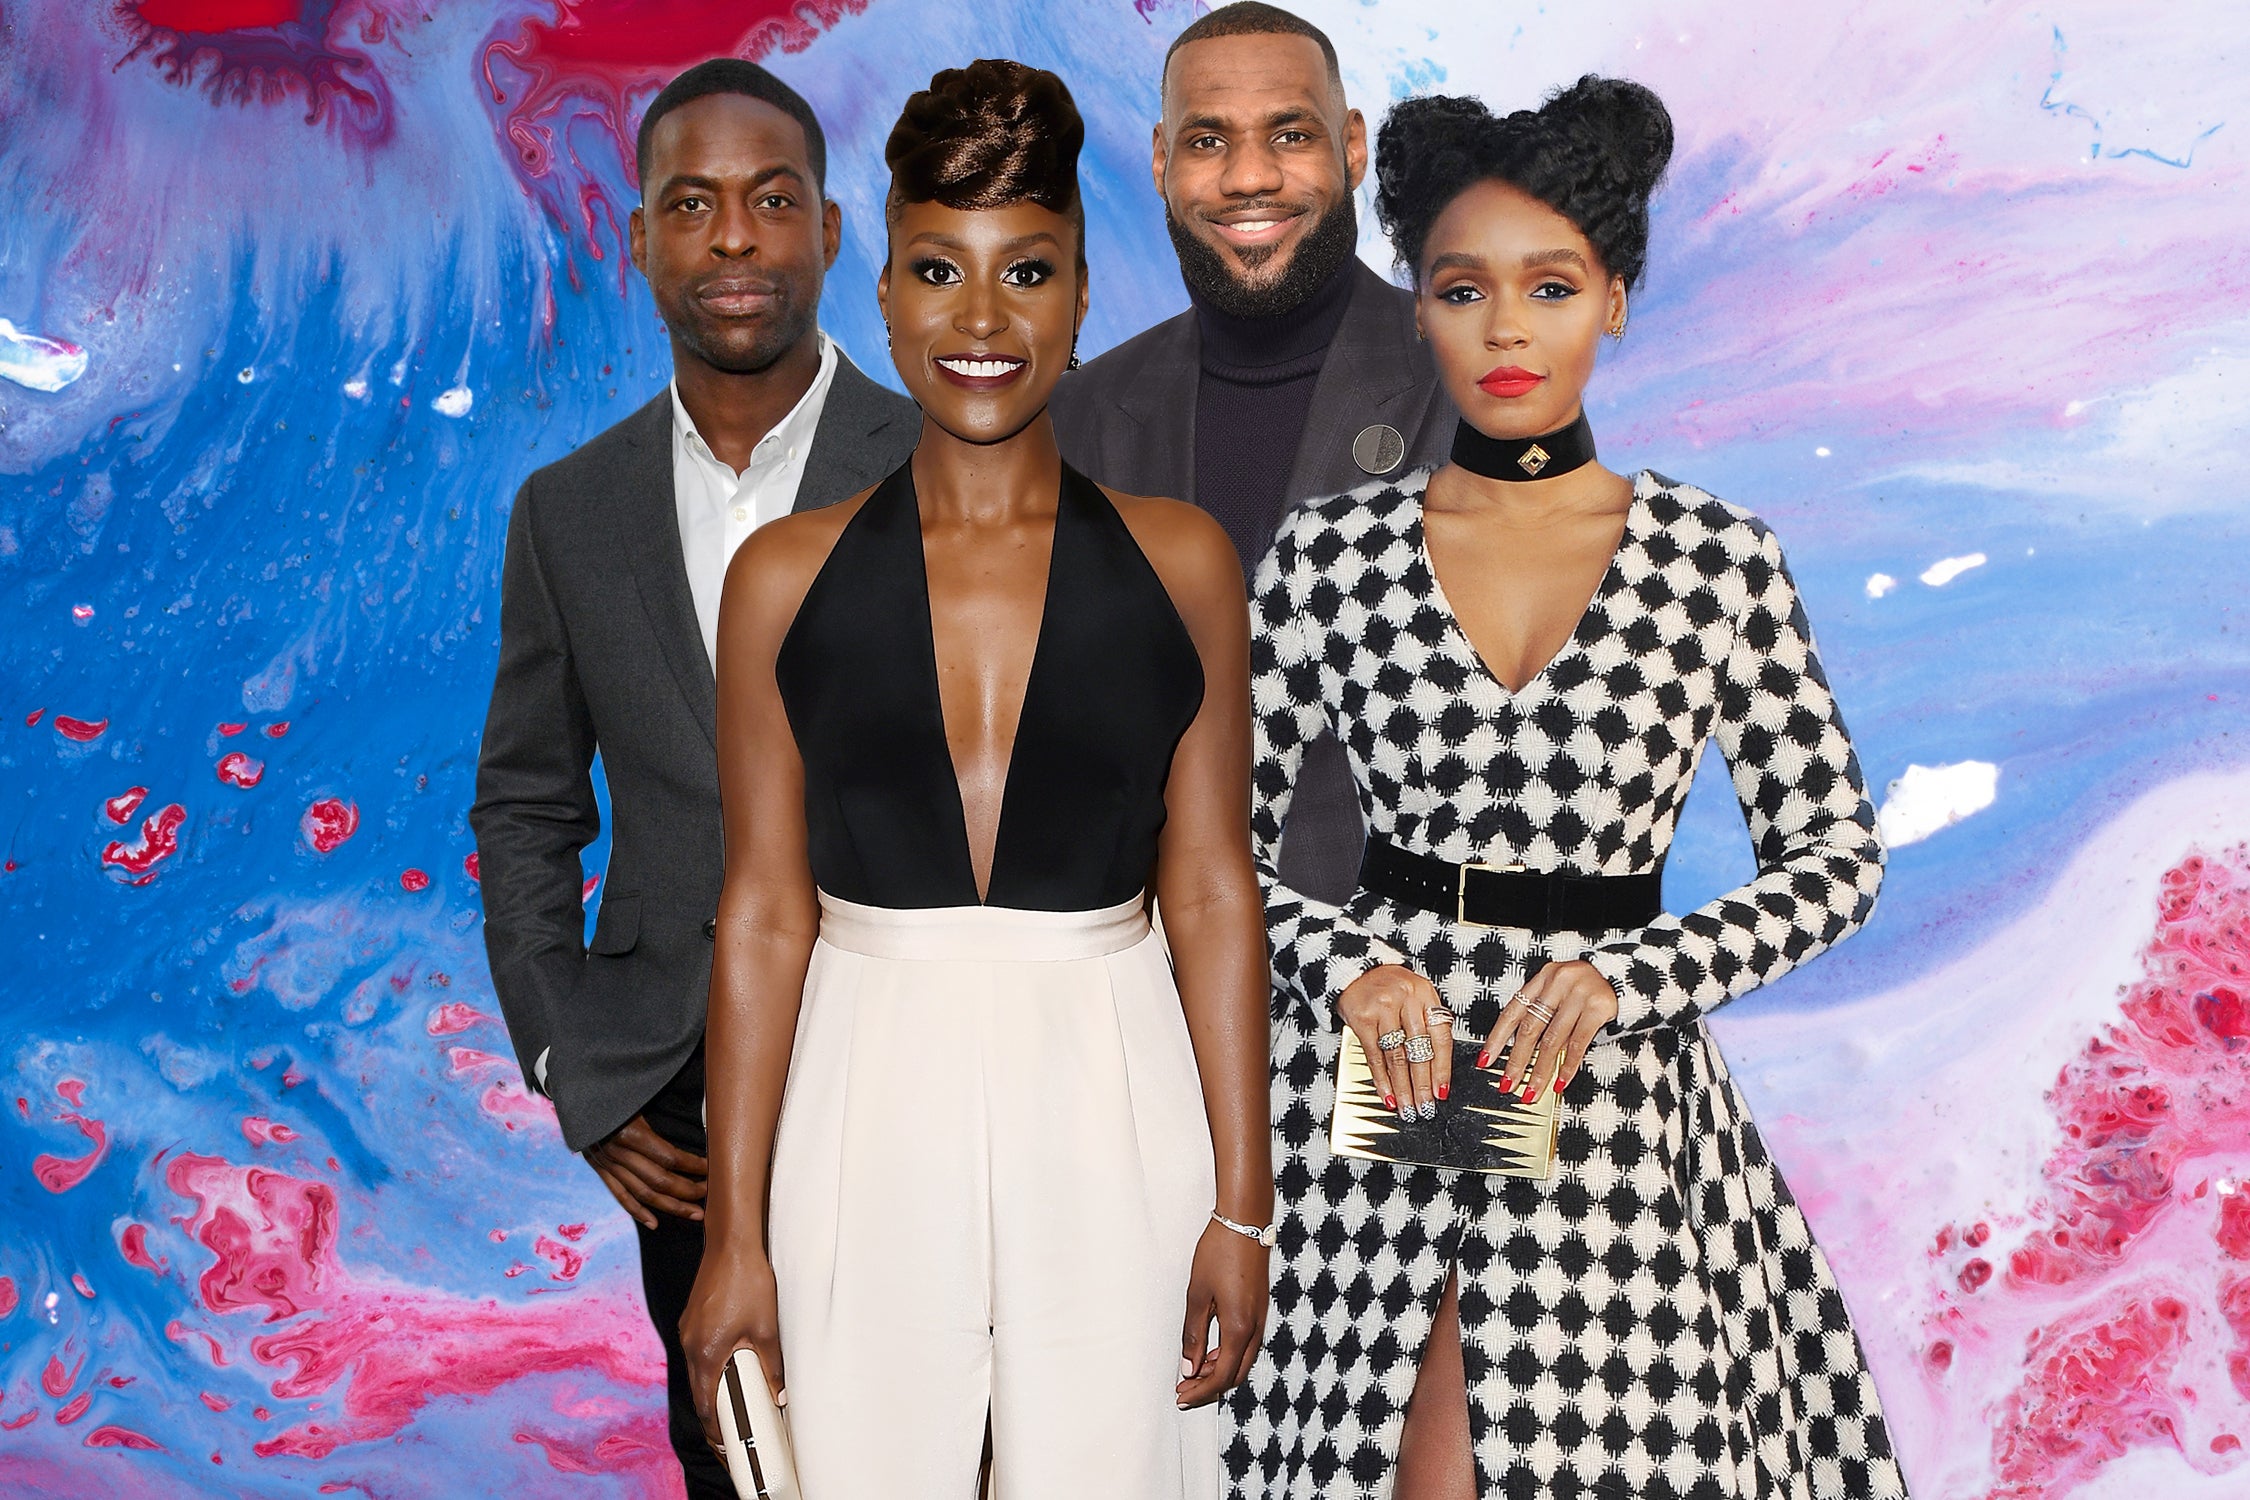  Here's Who We Can Expect At The 48th Annual NAACP Image Awards